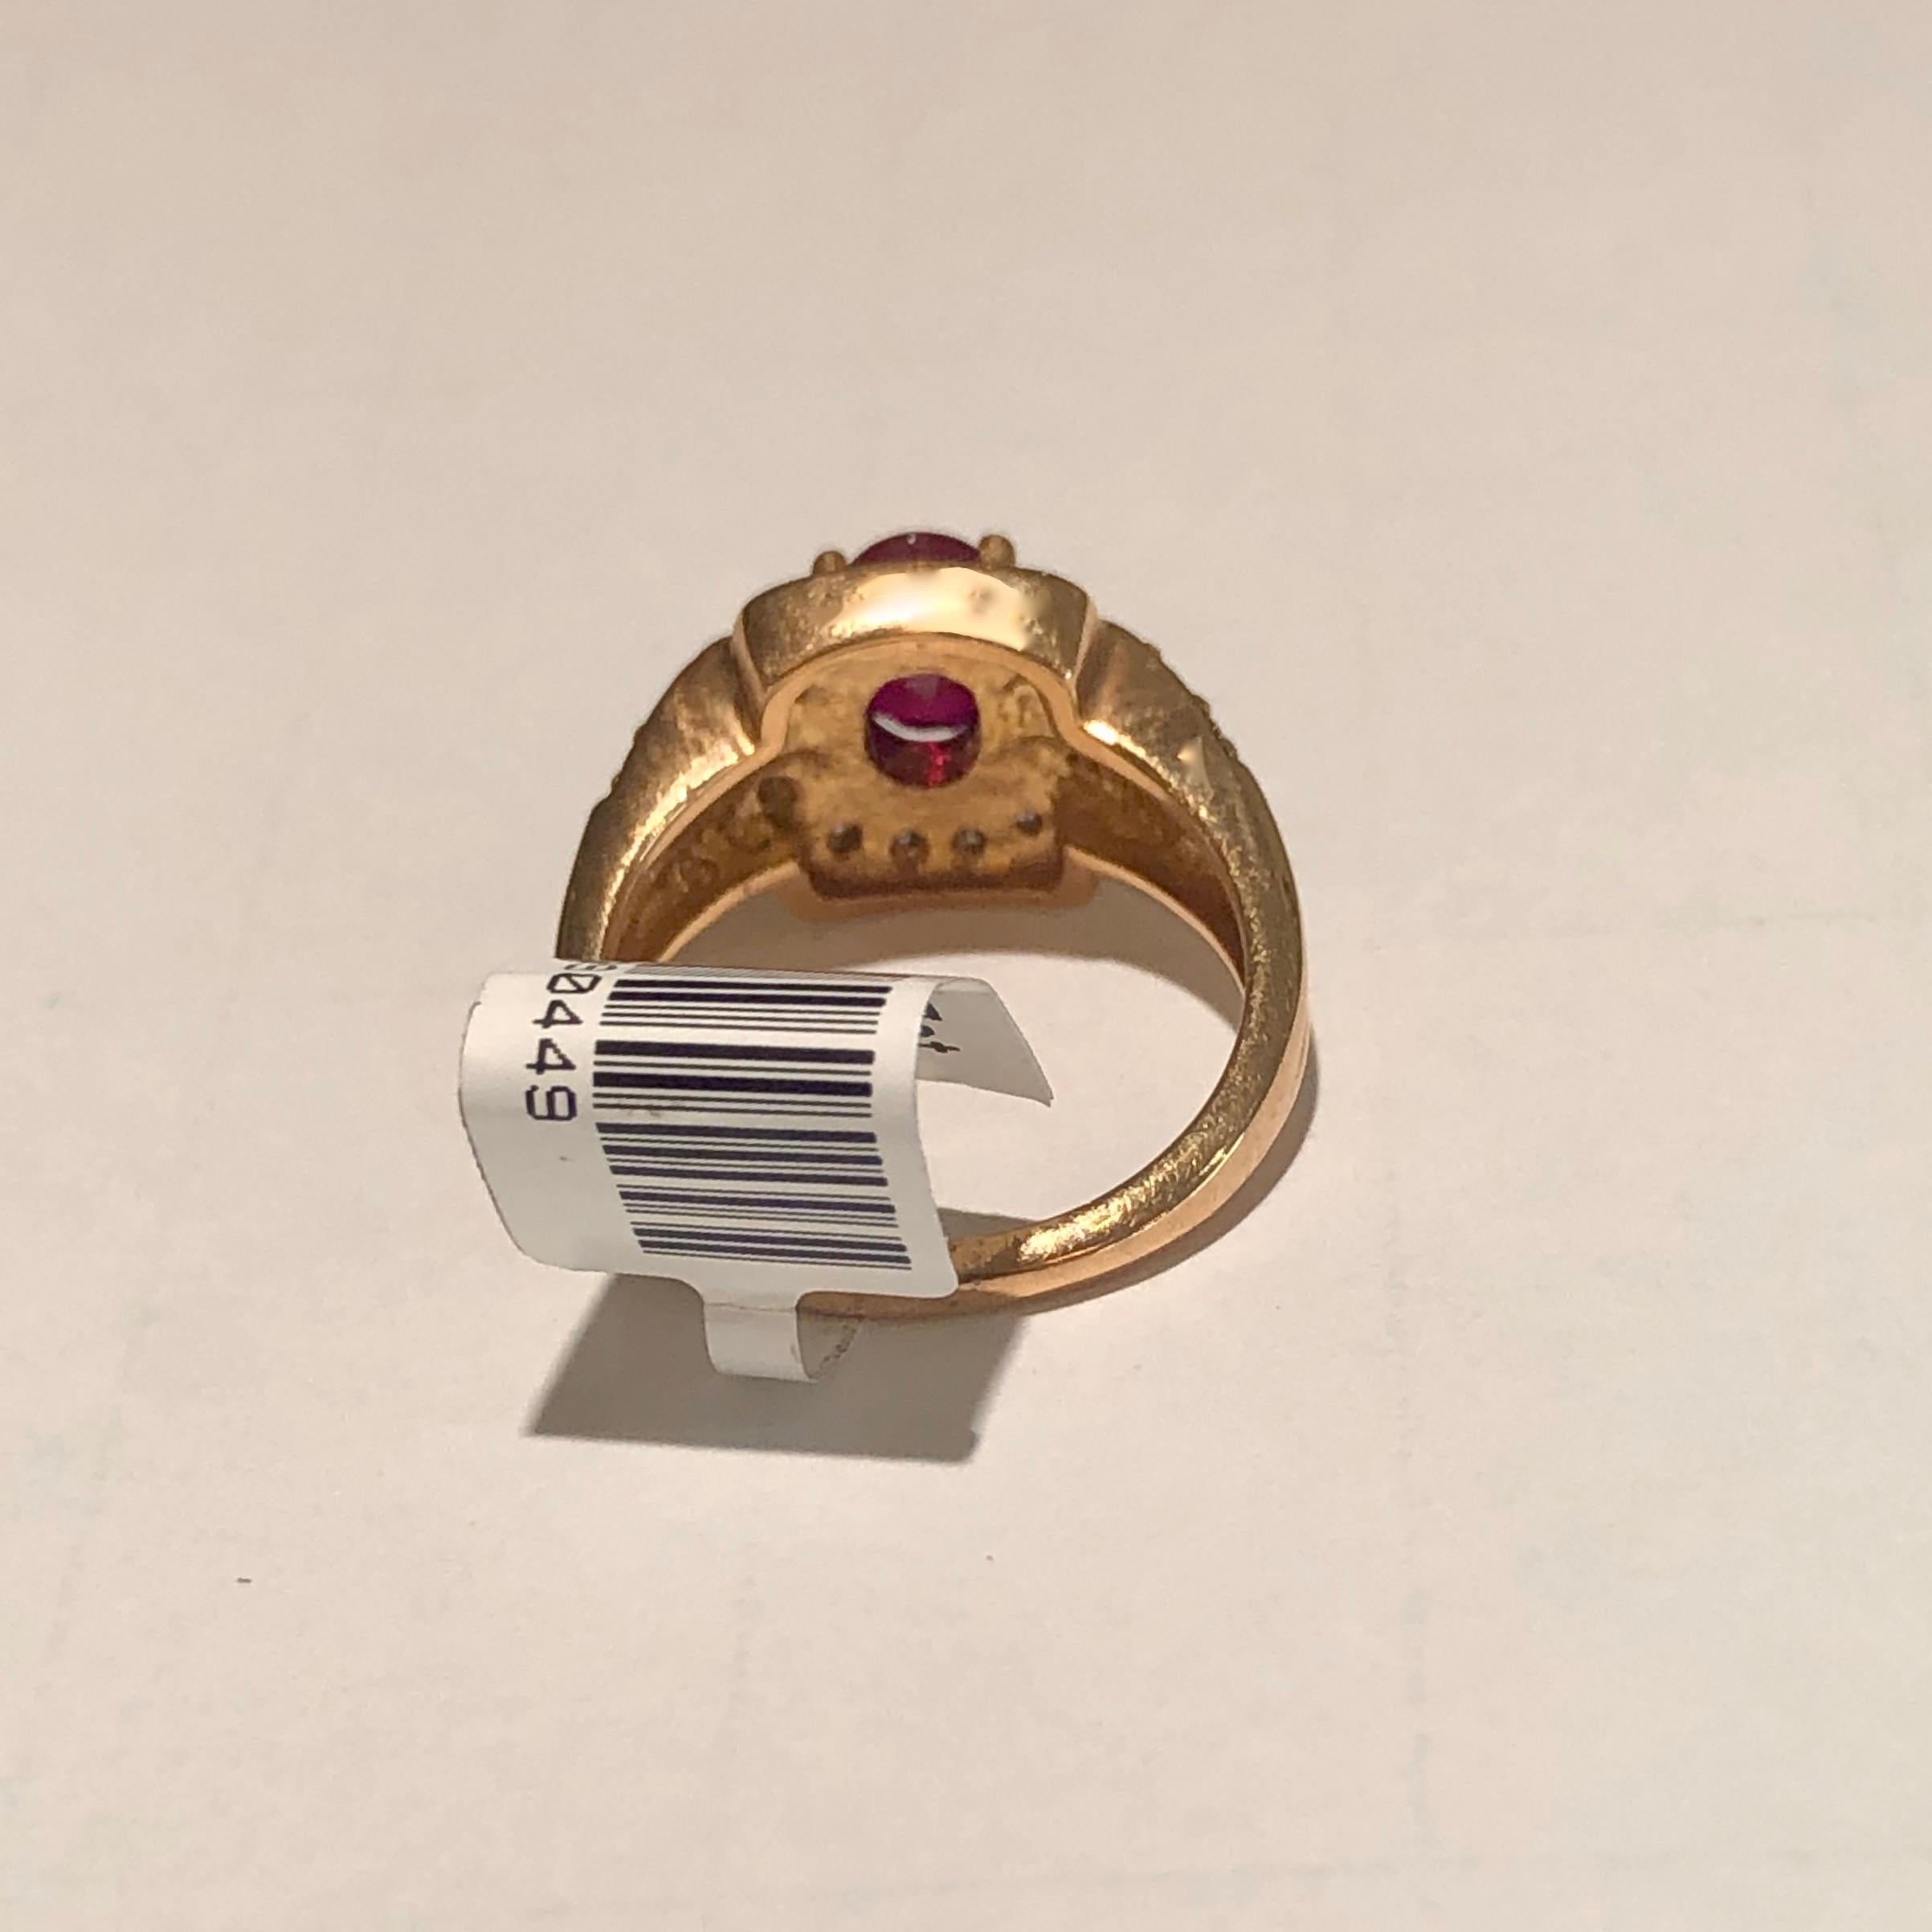 Vivid Red Ruby and Diamonds Ring 18 Karat Gold For Sale 2